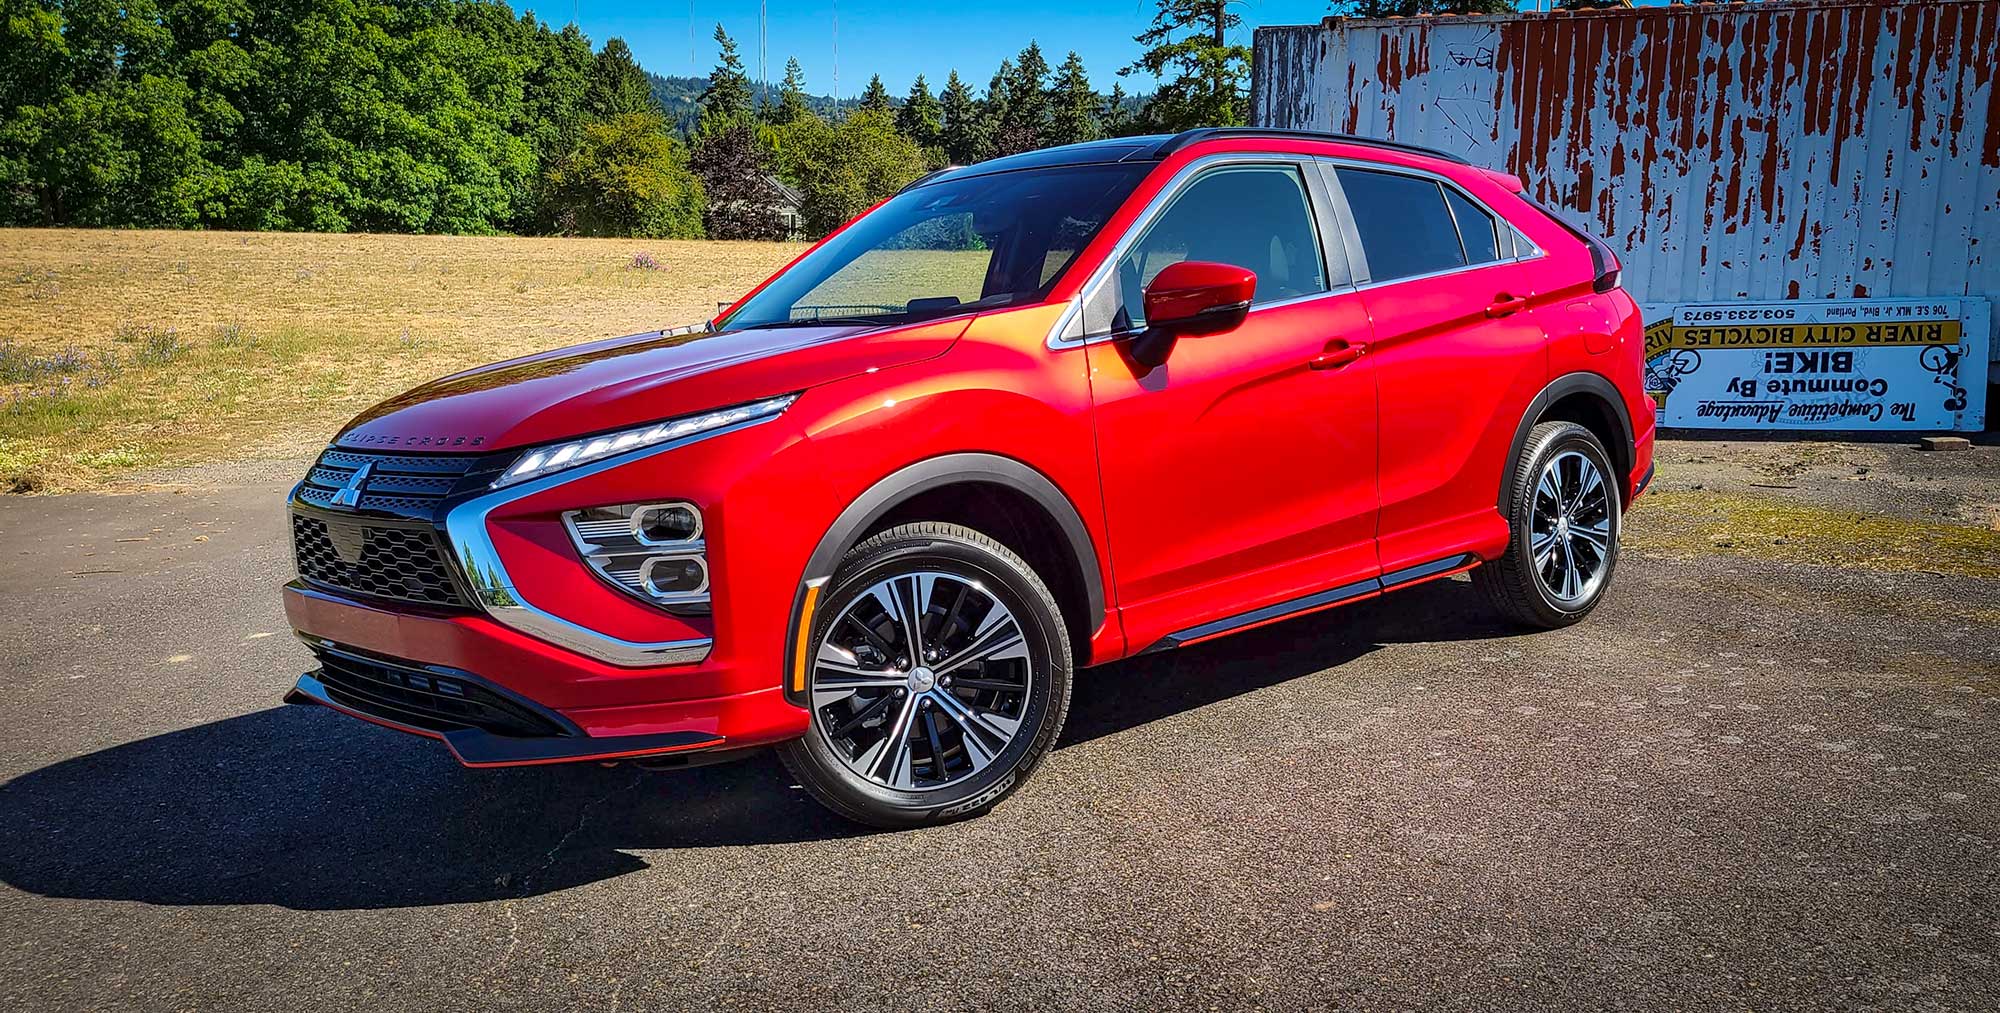 2022 Mitsubishi Eclipse Cross Review: Improved but Imperfect | GearJunkie